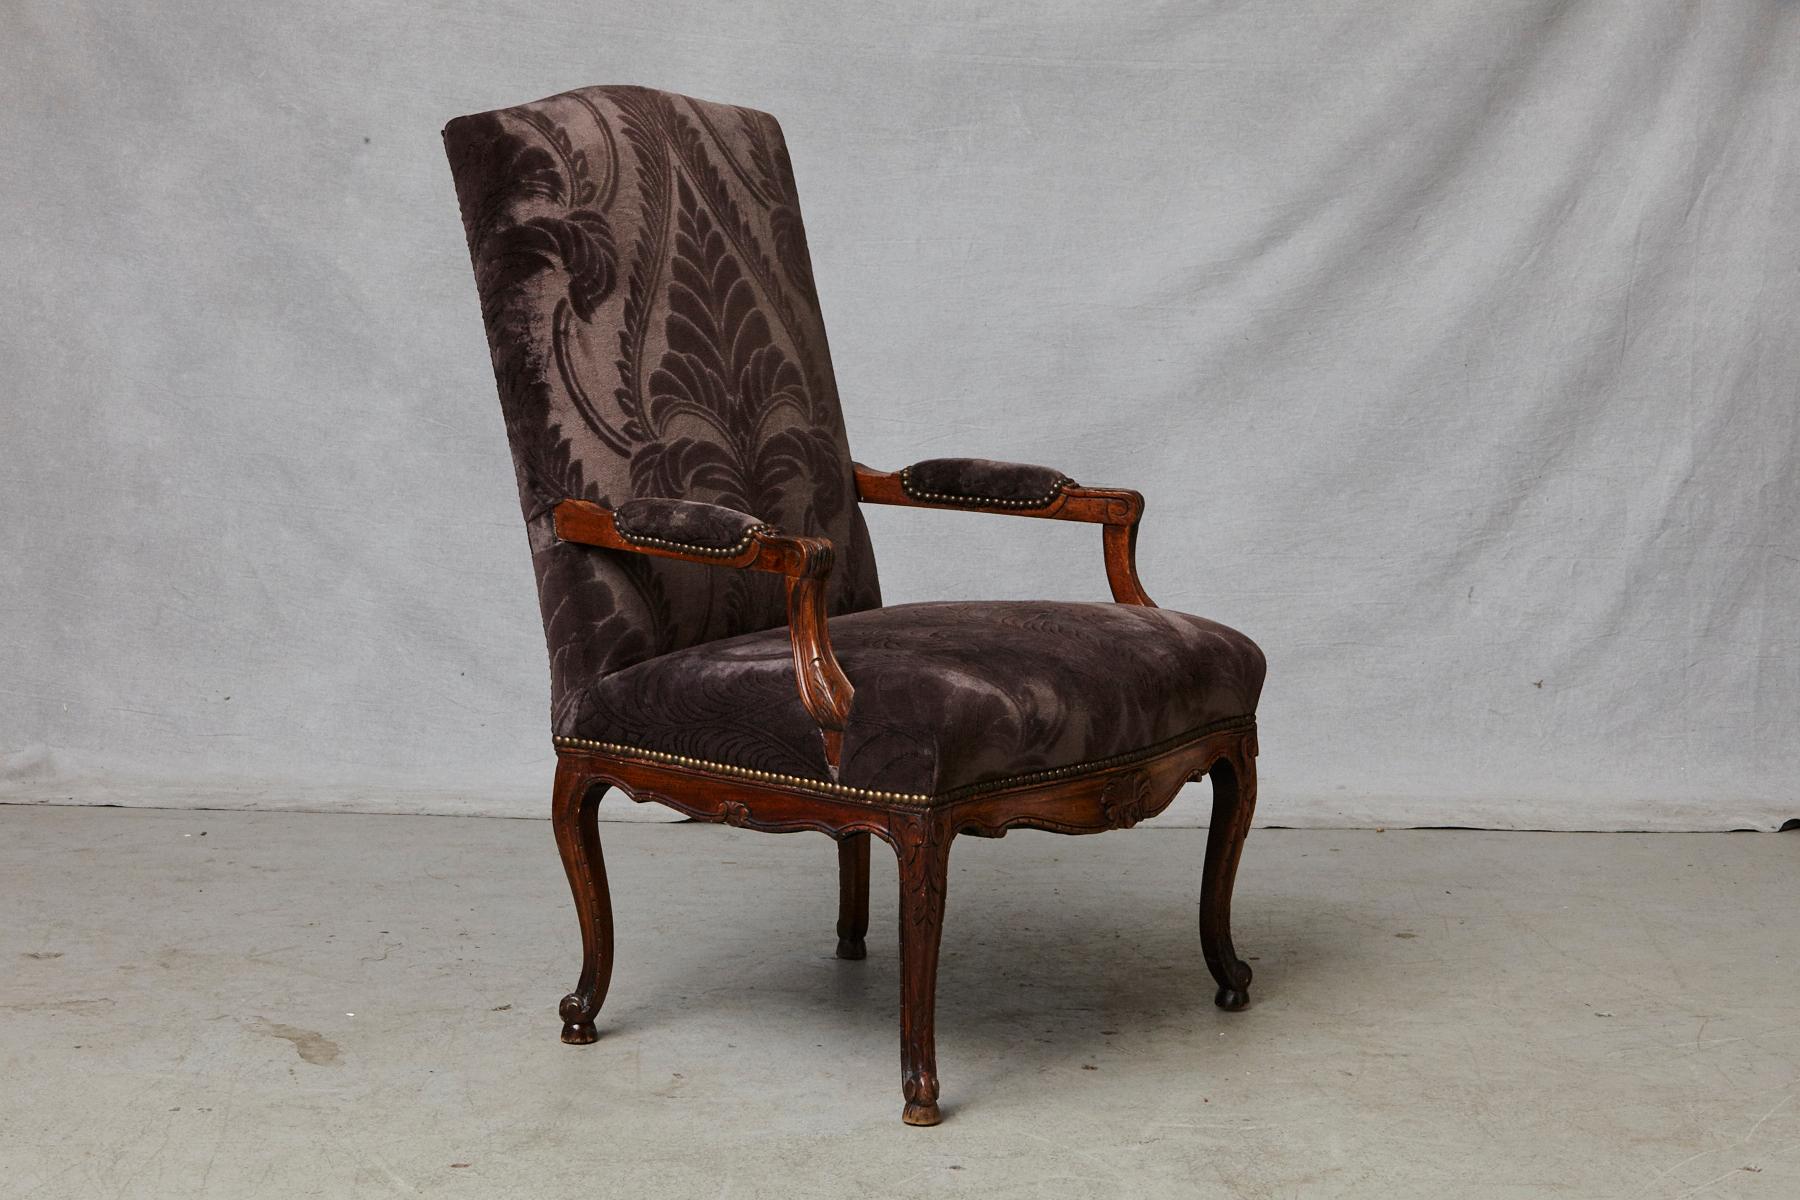 Exquisite late 19th century French Régence style walnut fauteuil or armchair with padded down scrolled arms, raised on cabriole legs with acanthus leaf carvings and escargot feet. The carved apron centred by a floral decor. Nail head trim around the